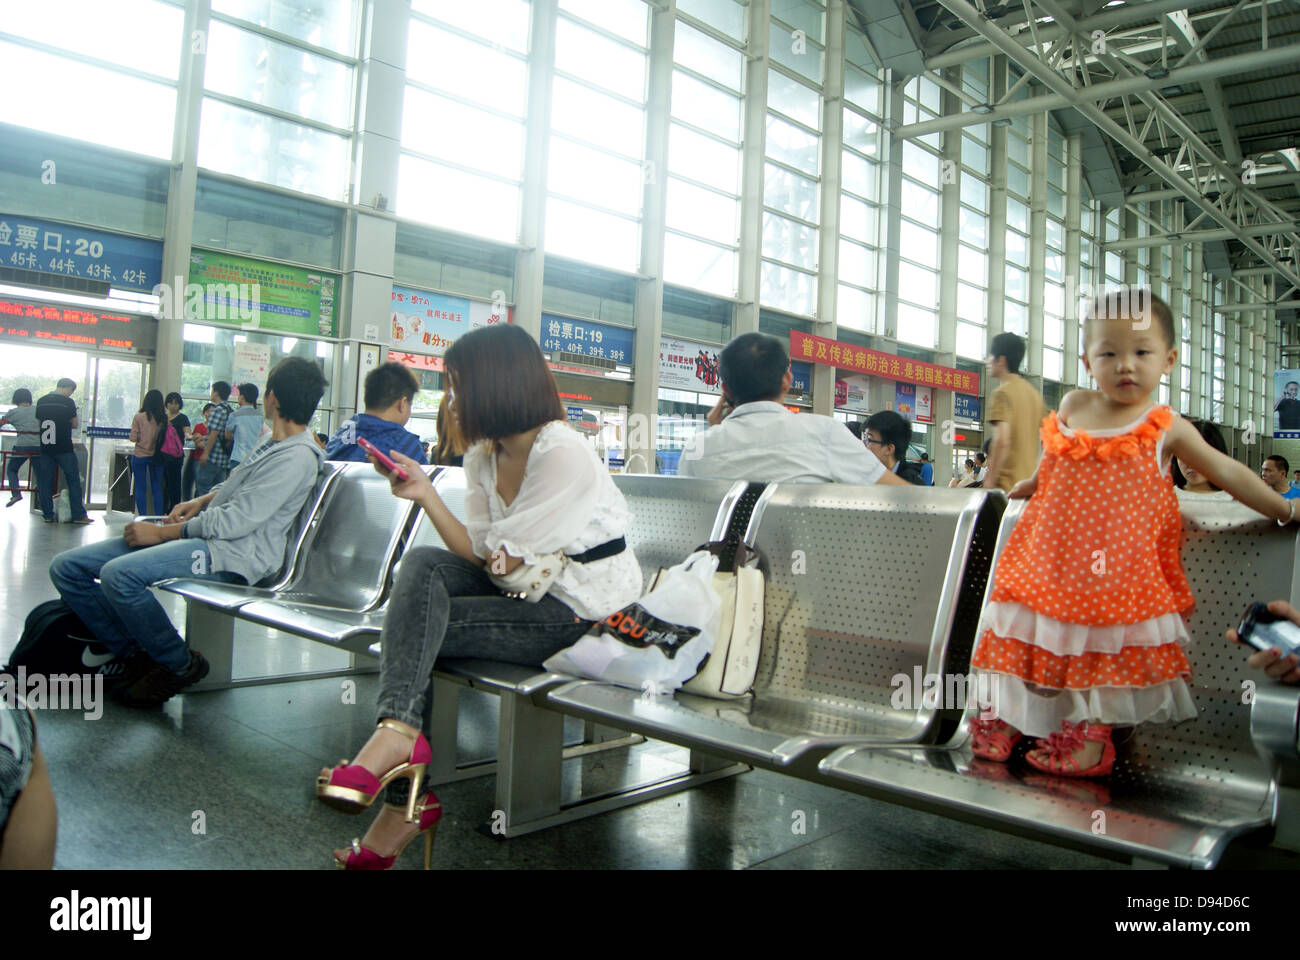 Dongguan bus station of the passenger, in China. Stock Photo